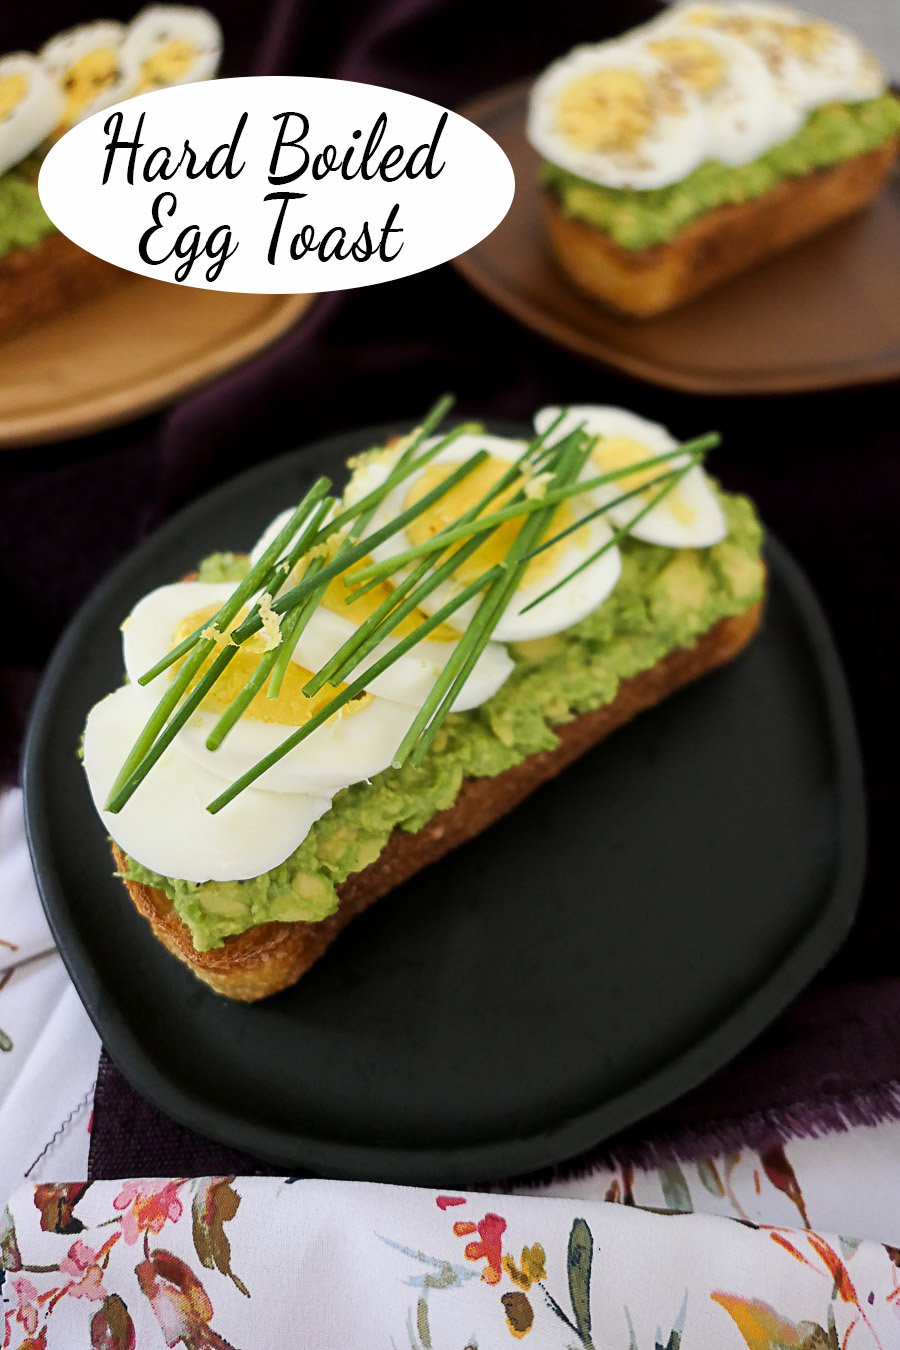 Hard Boiled Egg Breakfast Toast. These easy, make-ahead breakfast ideas are full of flavor, protein, and everything you want. Switch up these fun avocado toast toppings for extra crunch, veggies, and flavor ! #avocadotoast #breakfast #makeahead #vegetarian #lmreipces